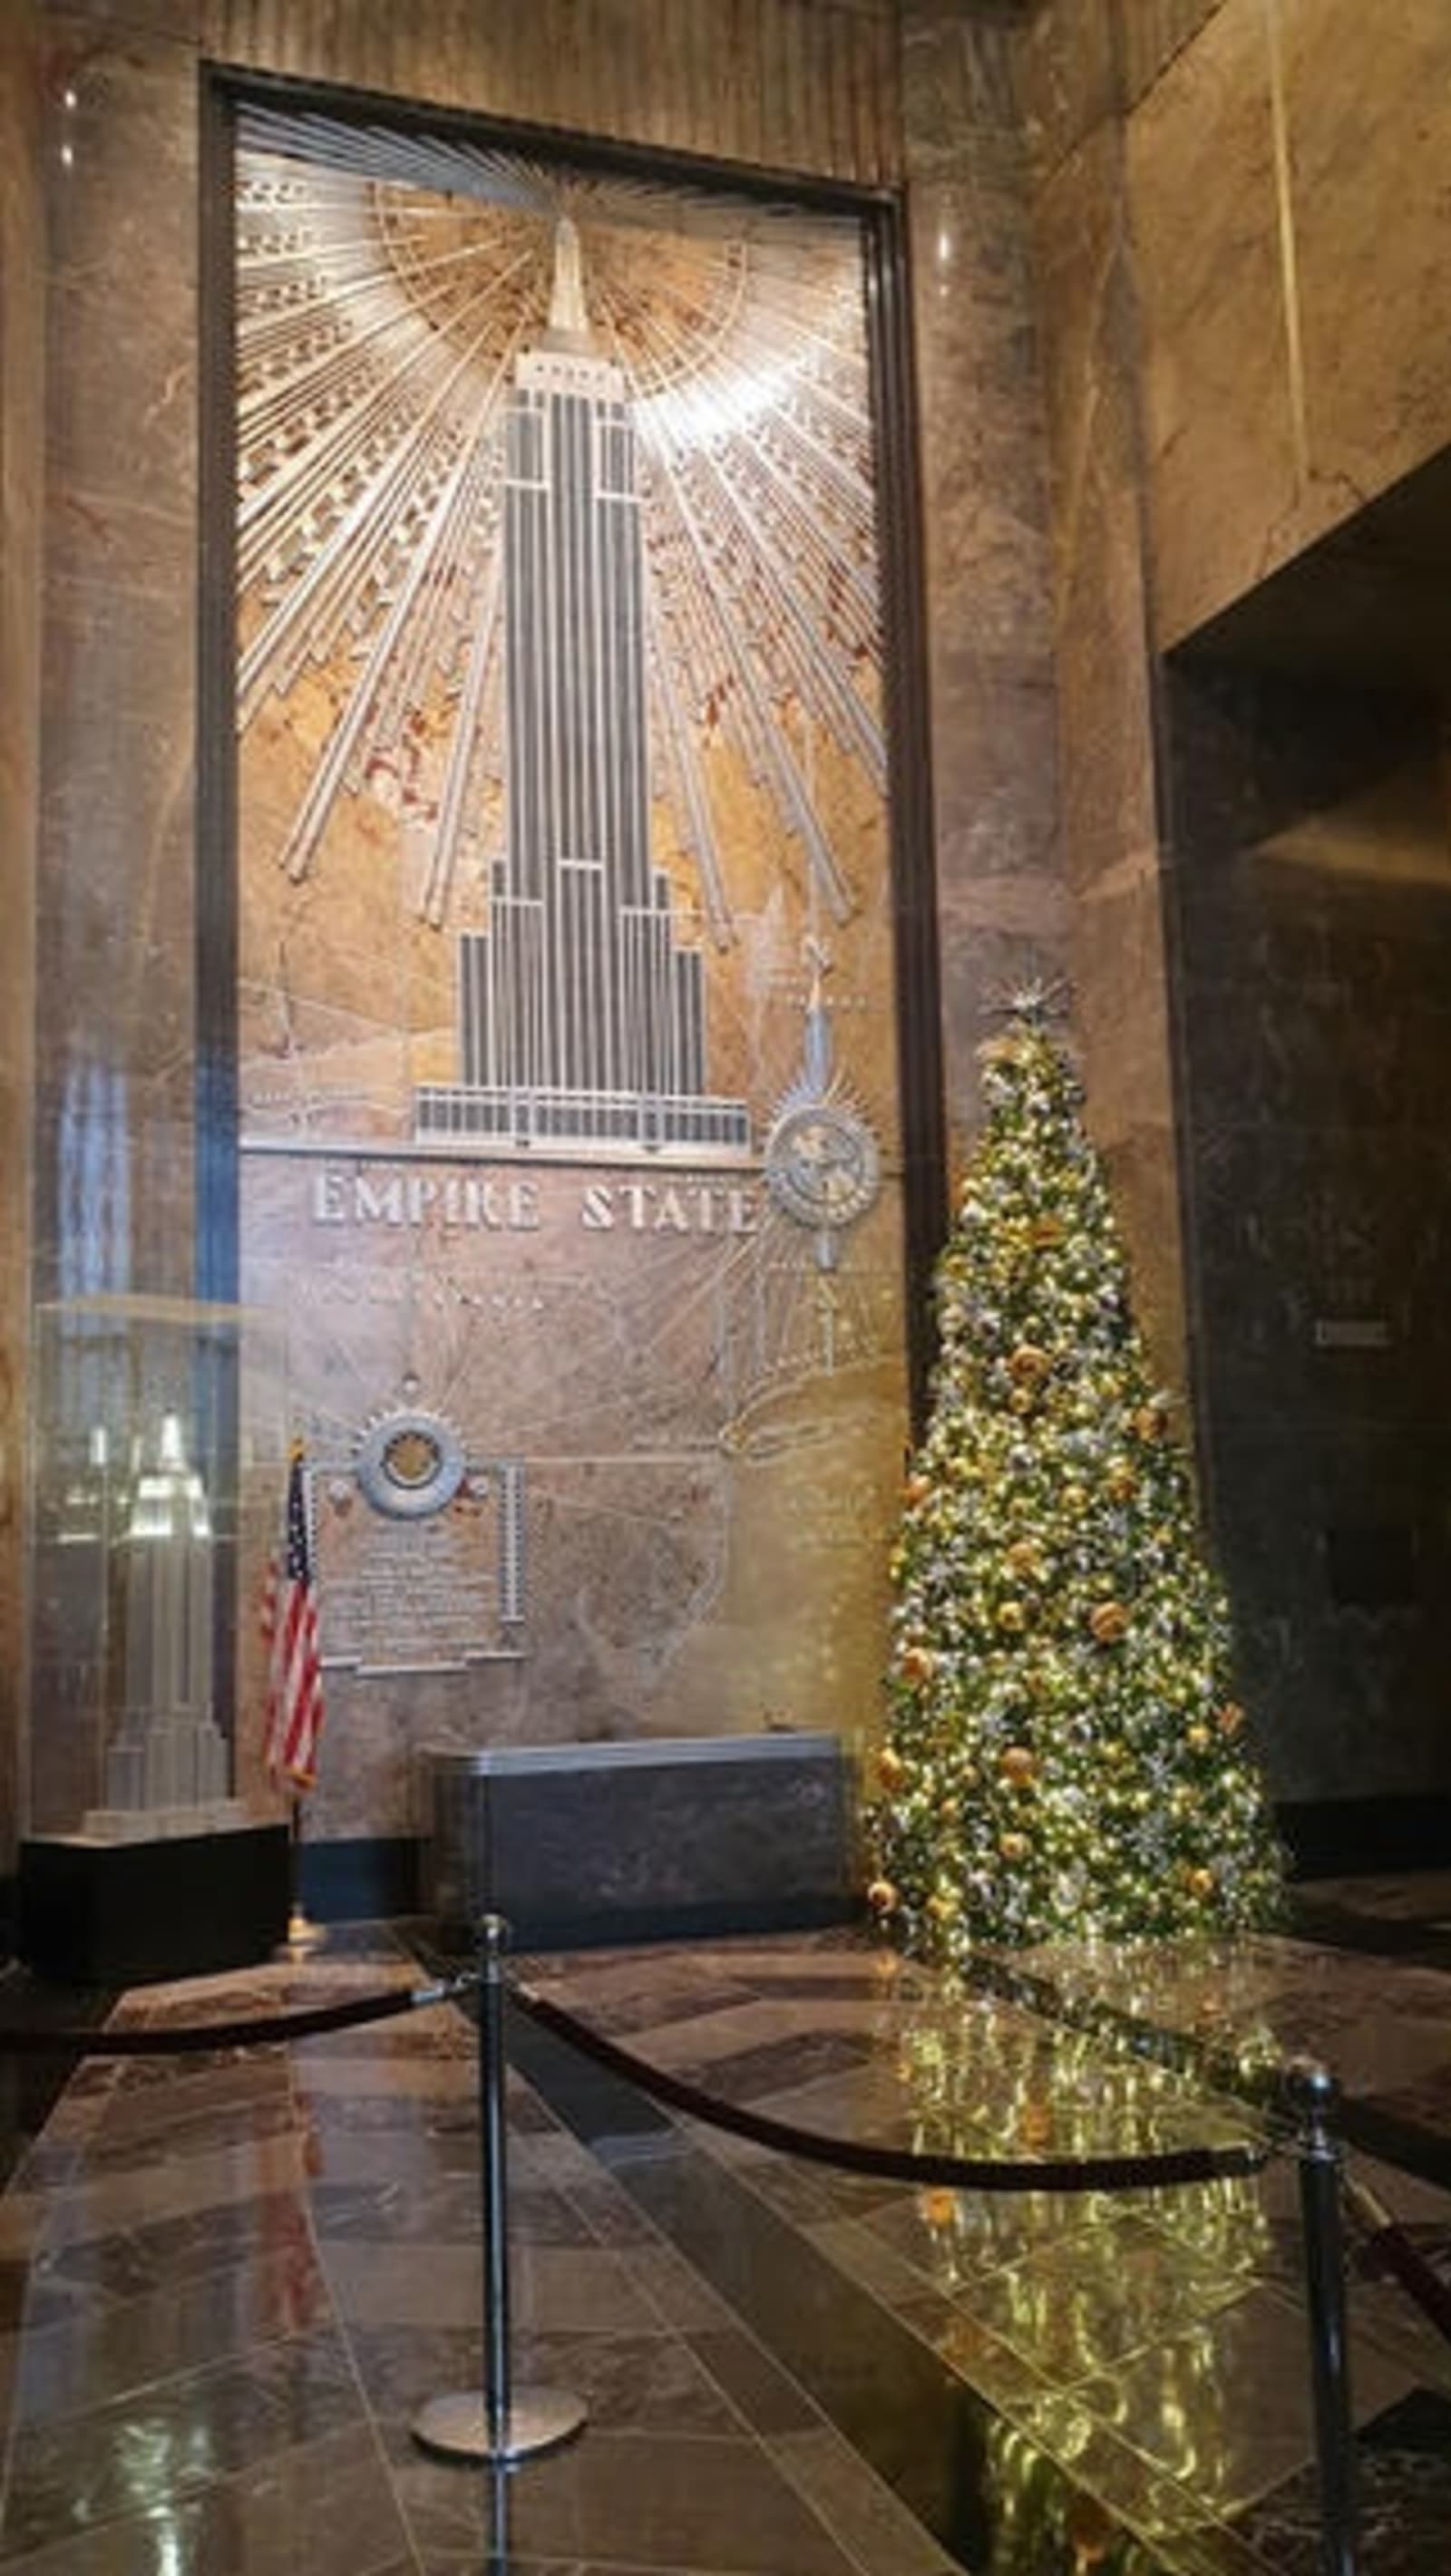 Empire State Building's lobby